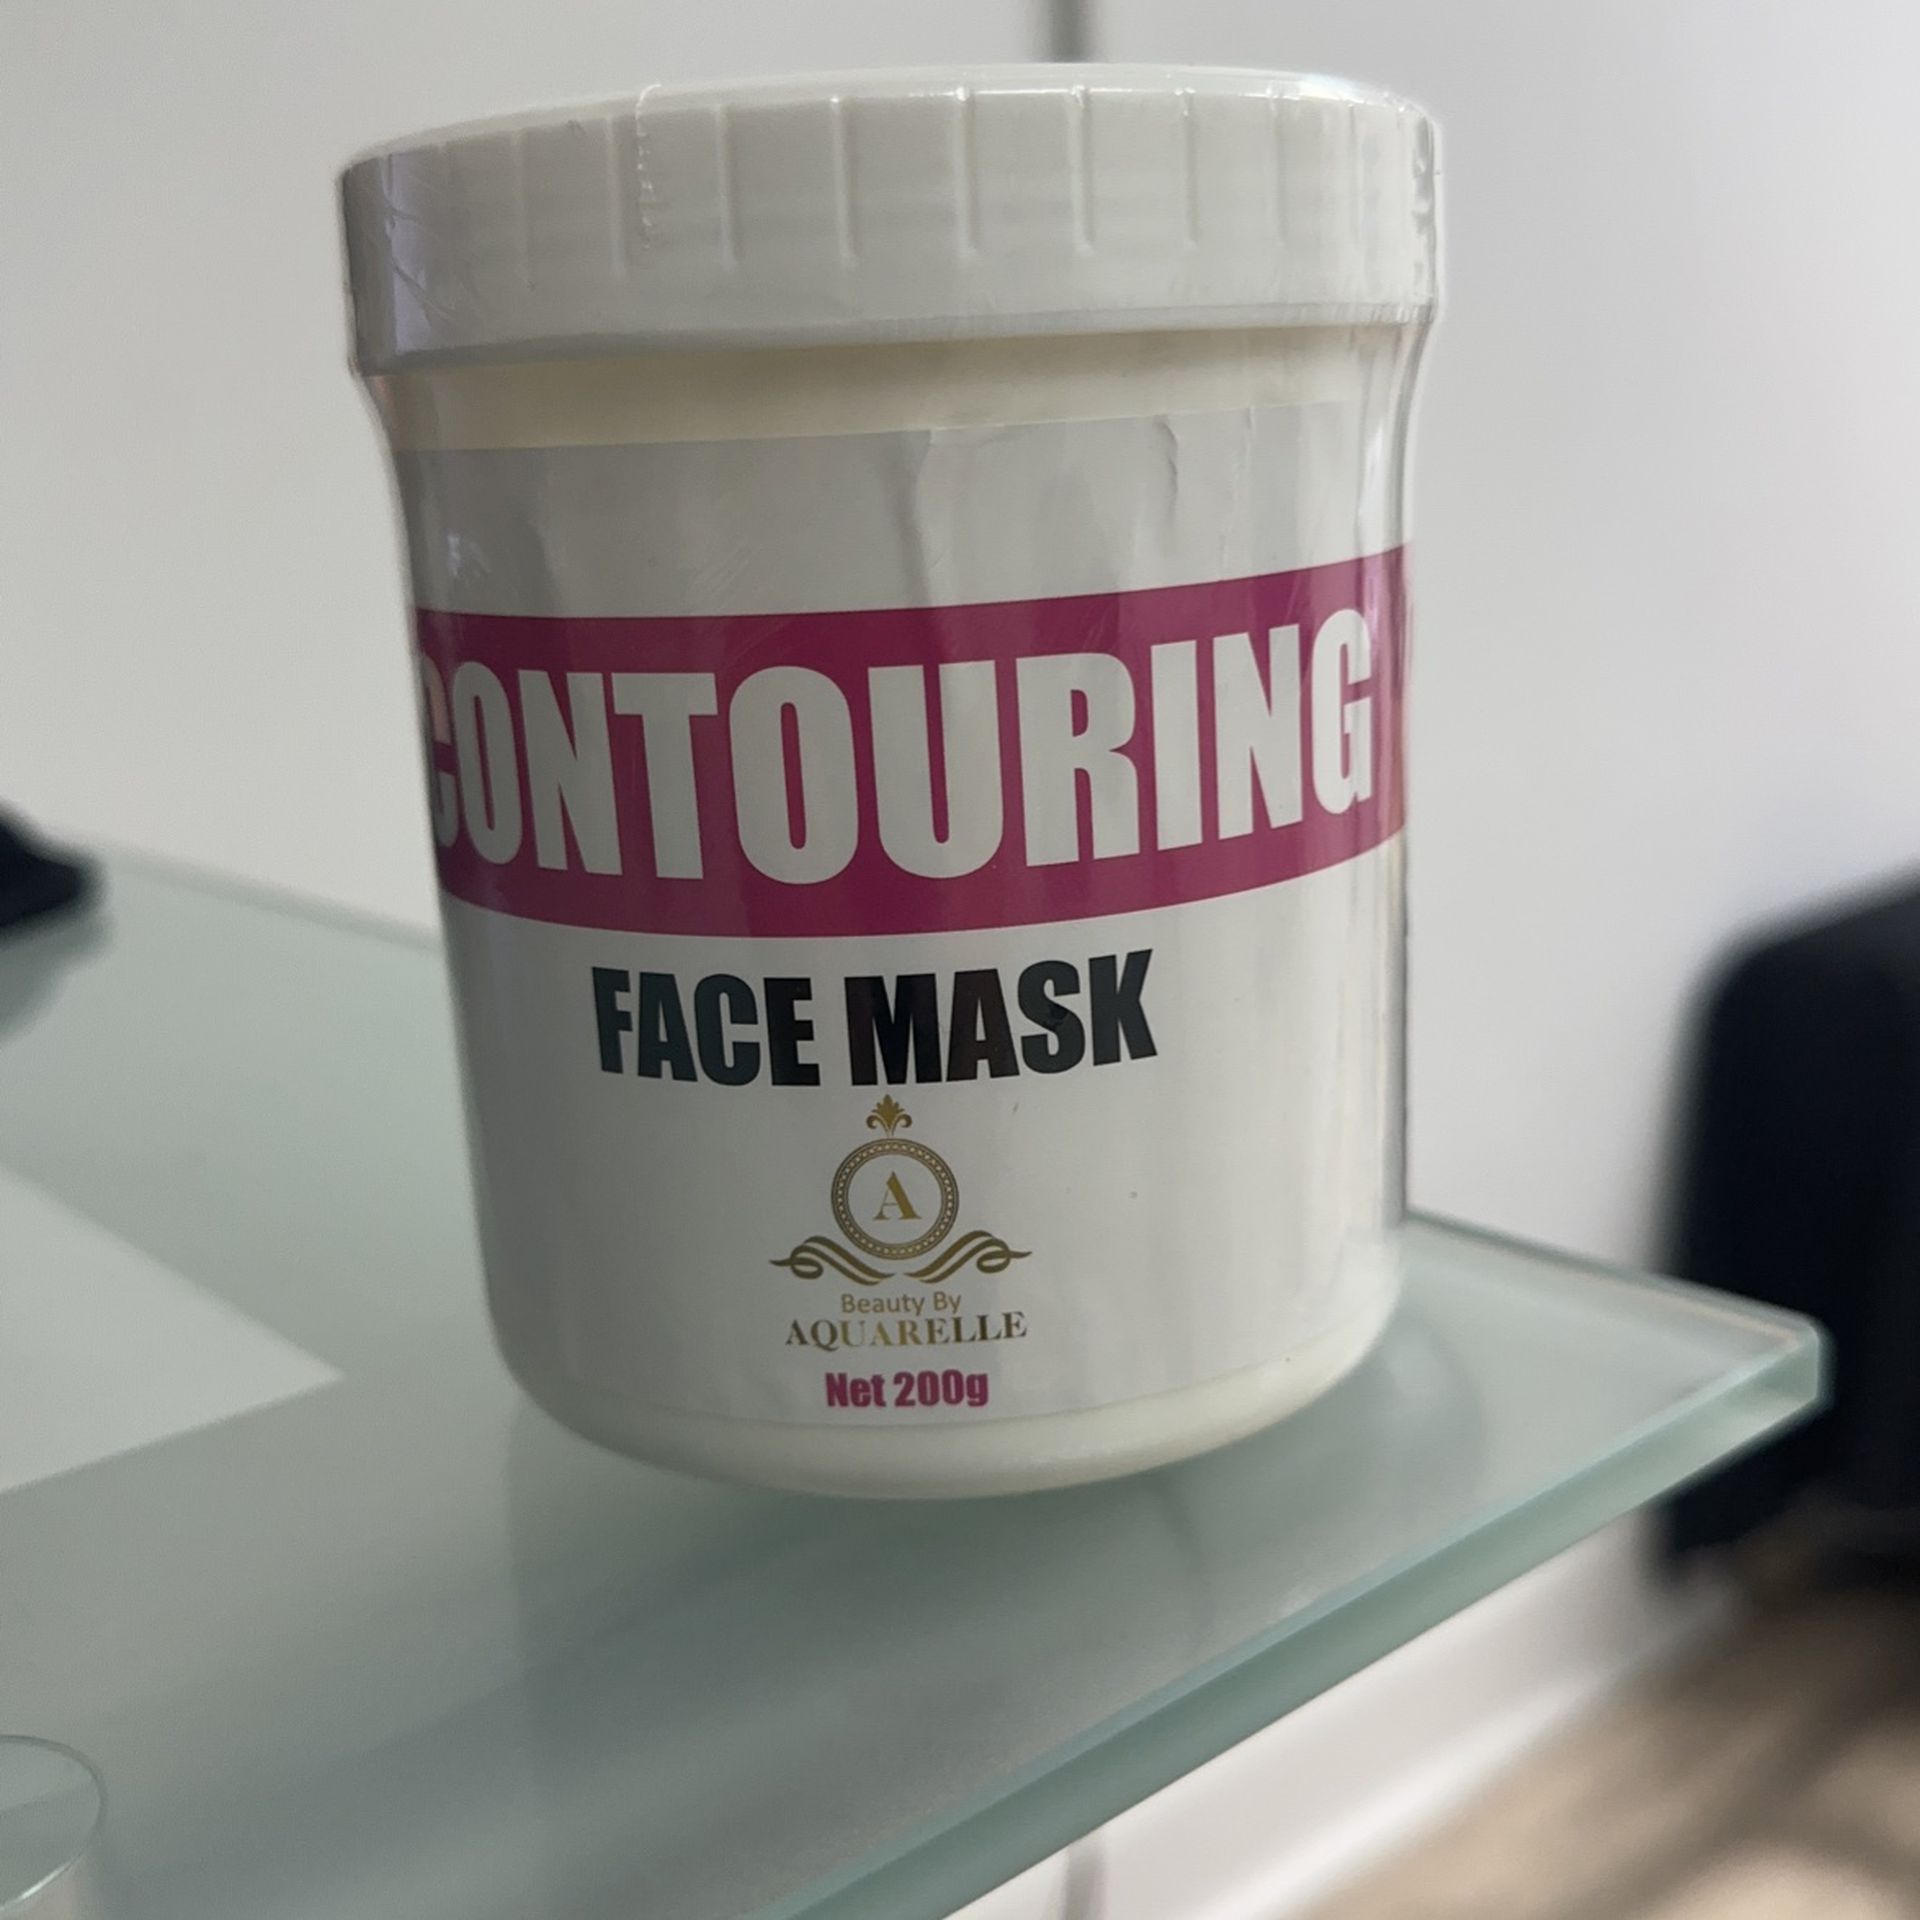 CONTOURING FACE MASK